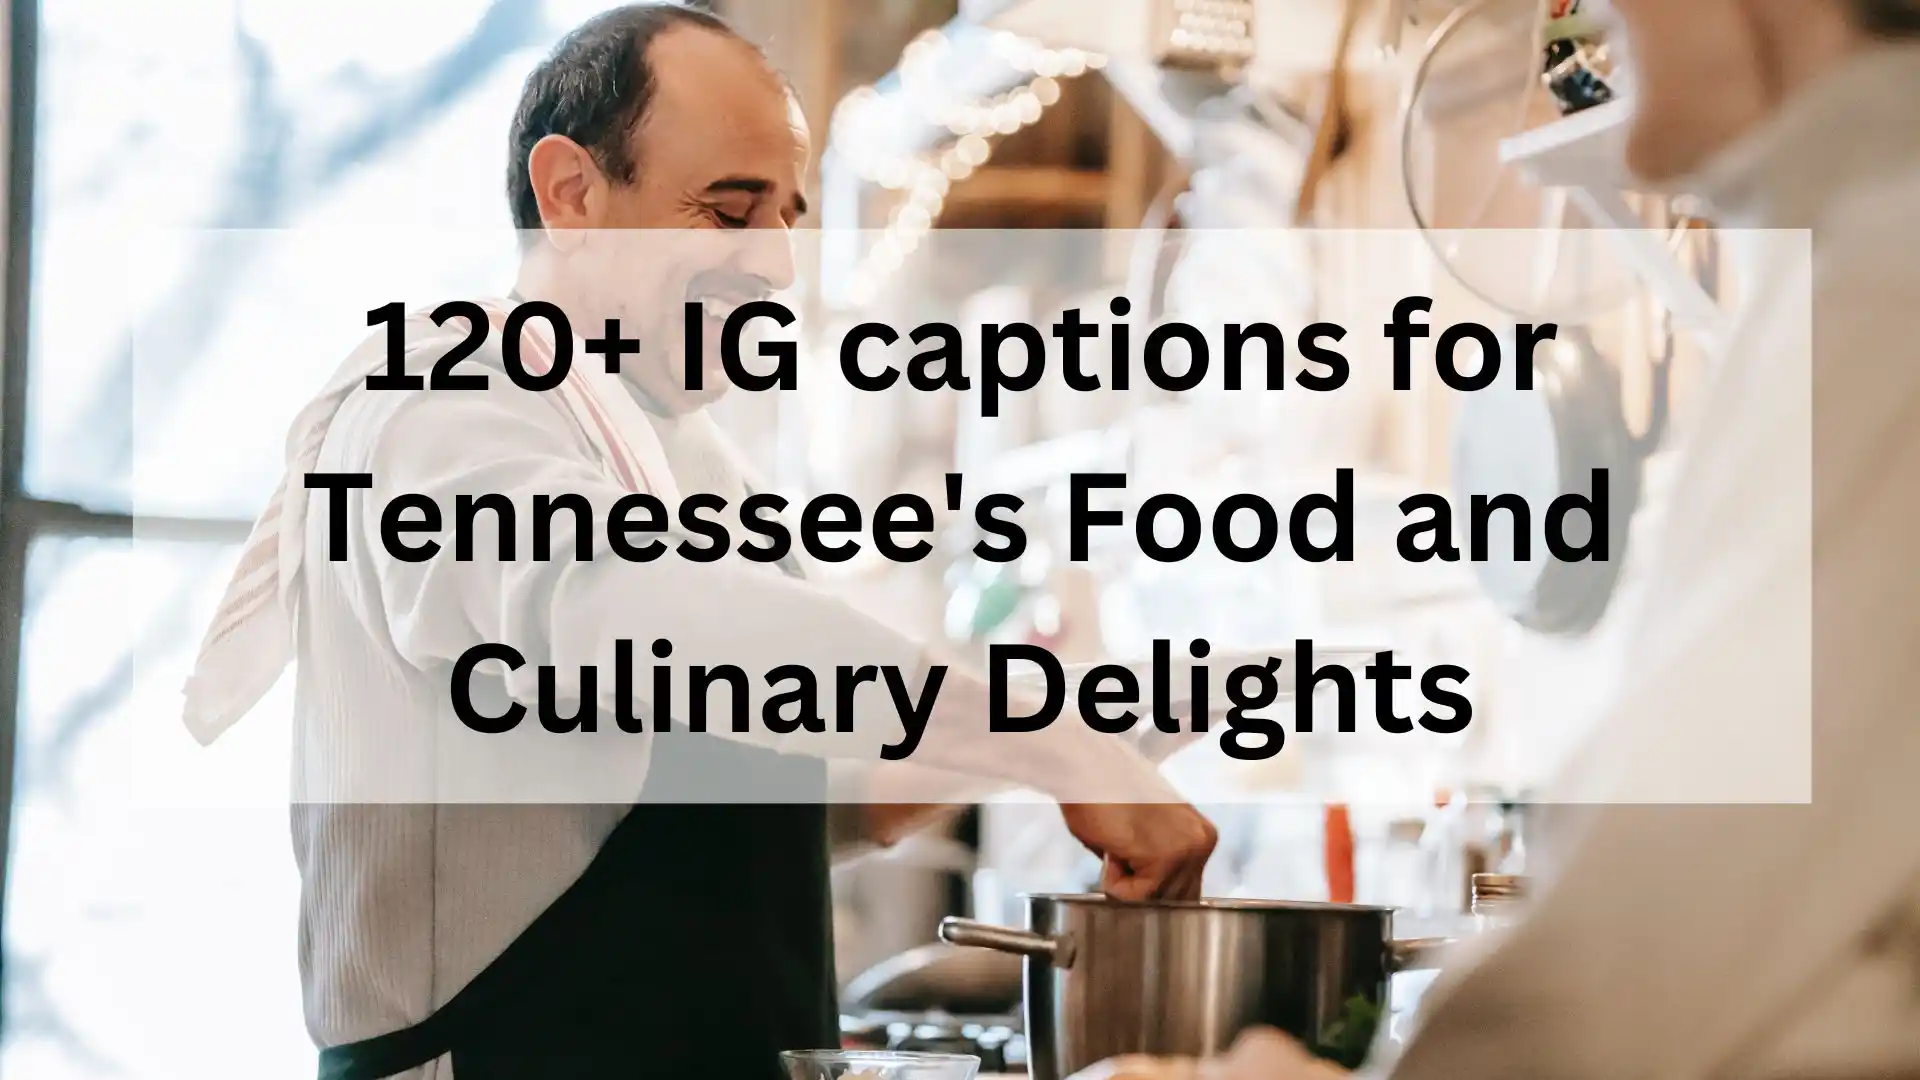 Instagram captions for Tennessee's Food and Culinary Delights